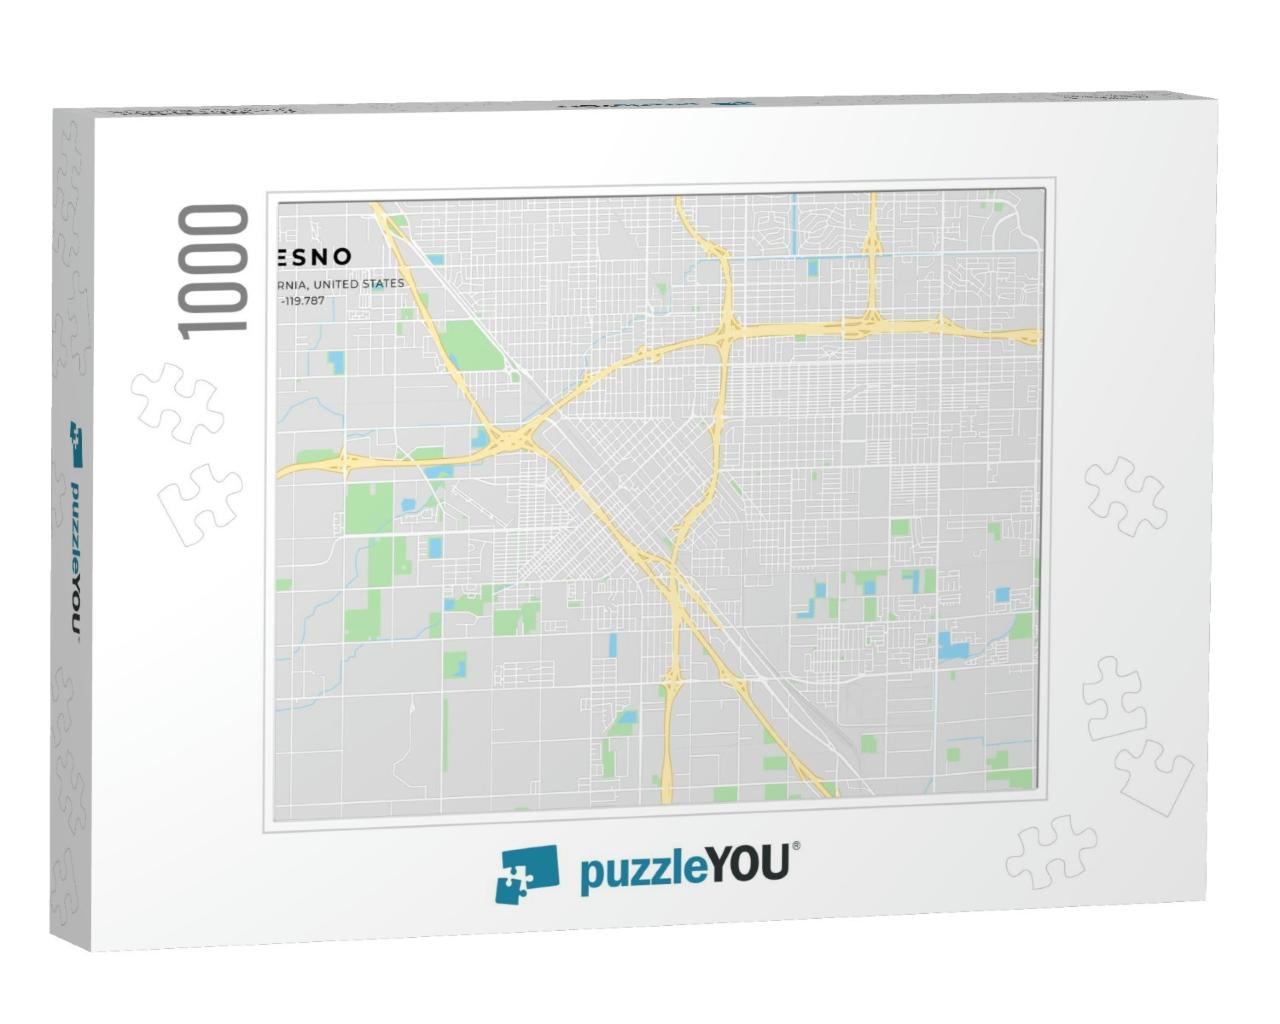 Printable Street Map of Fresno Including Highways, Major... Jigsaw Puzzle with 1000 pieces